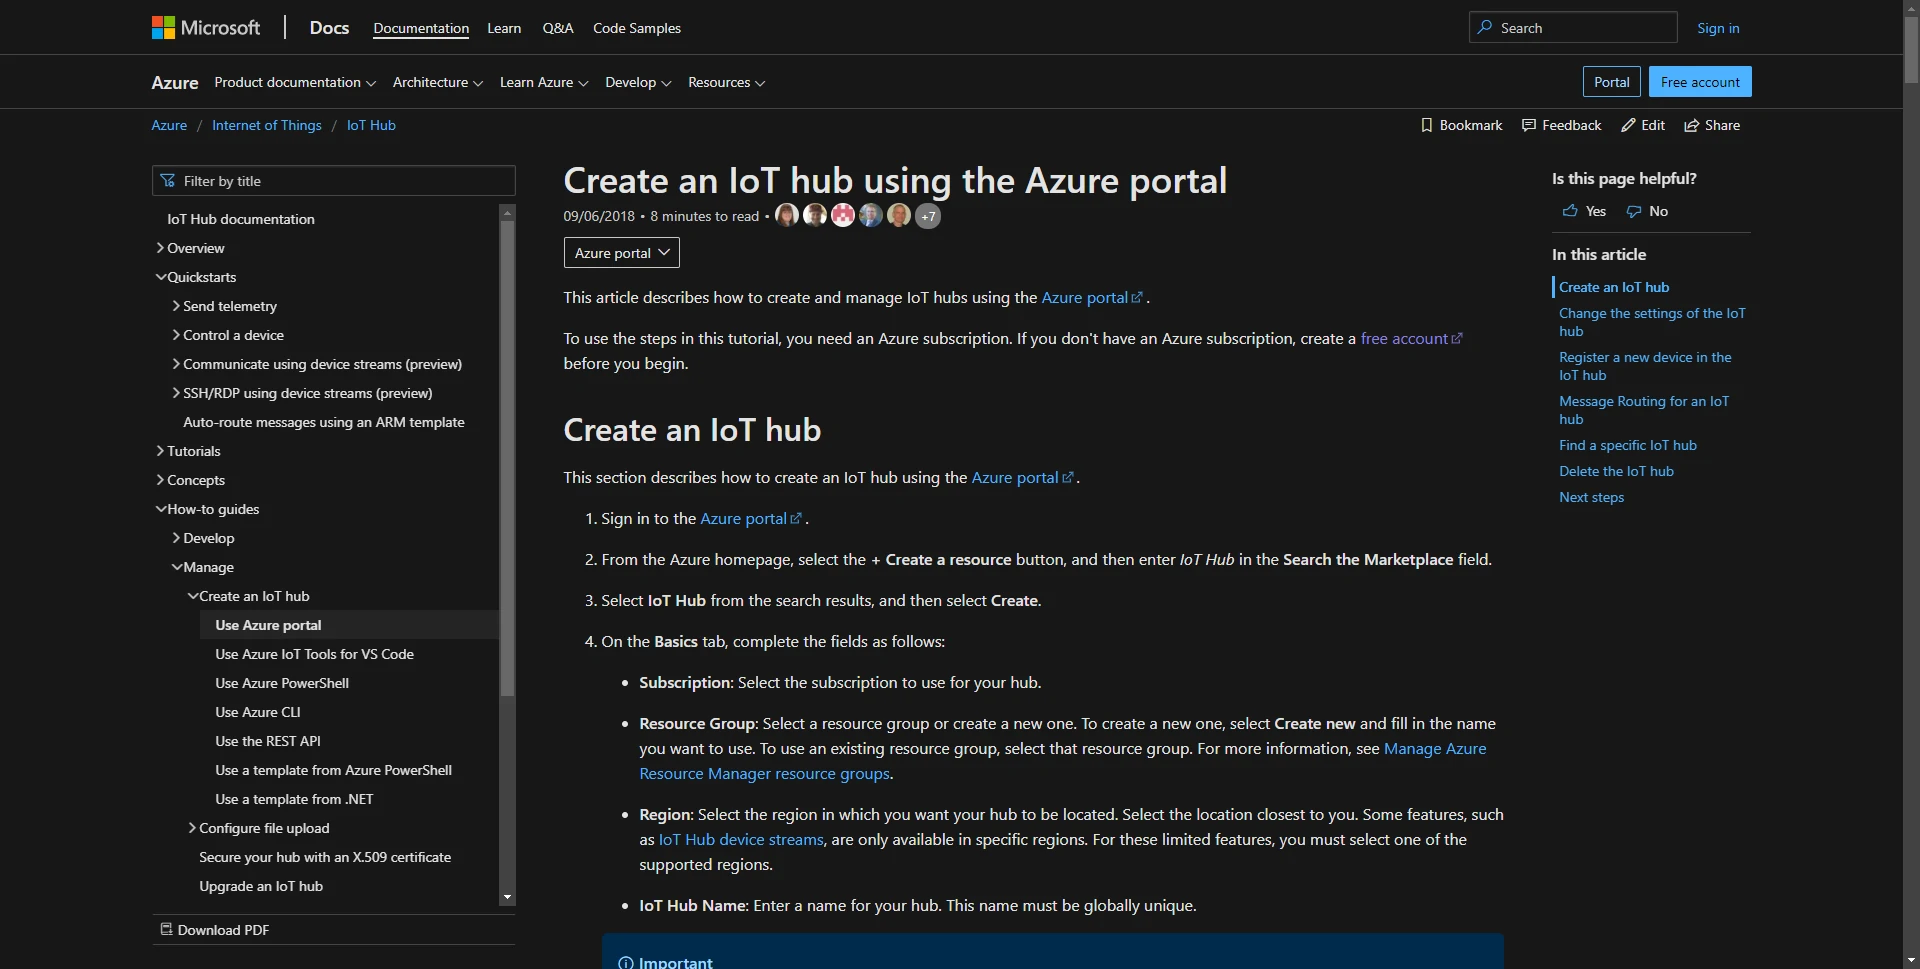 Create an IoT Hub and register a new device through the Azure portal. Detailed steps can be found in the Azure official documentation.